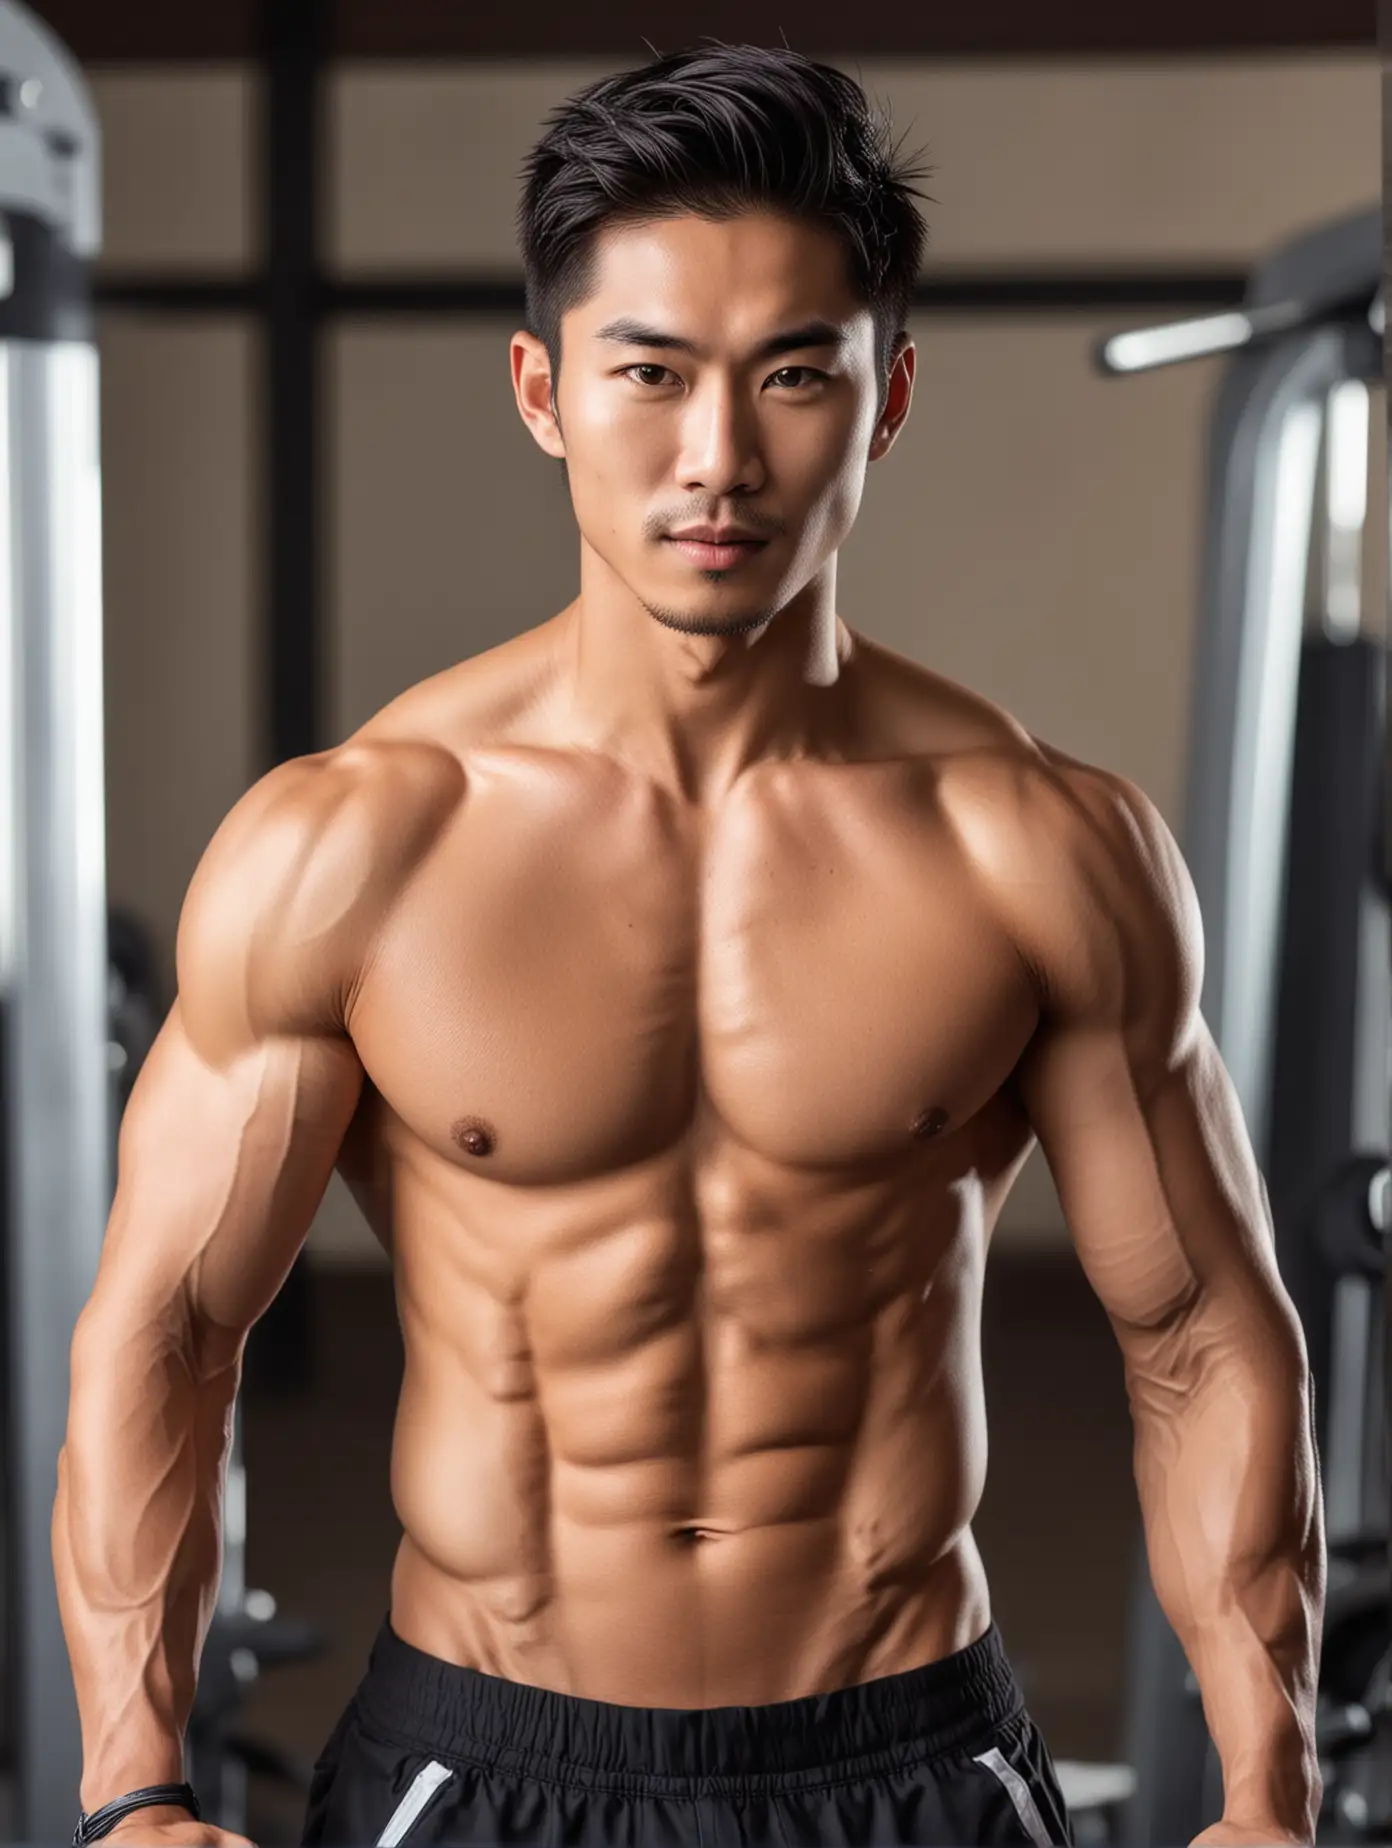 Asian sexy male fitness photo, gym background, camera focus